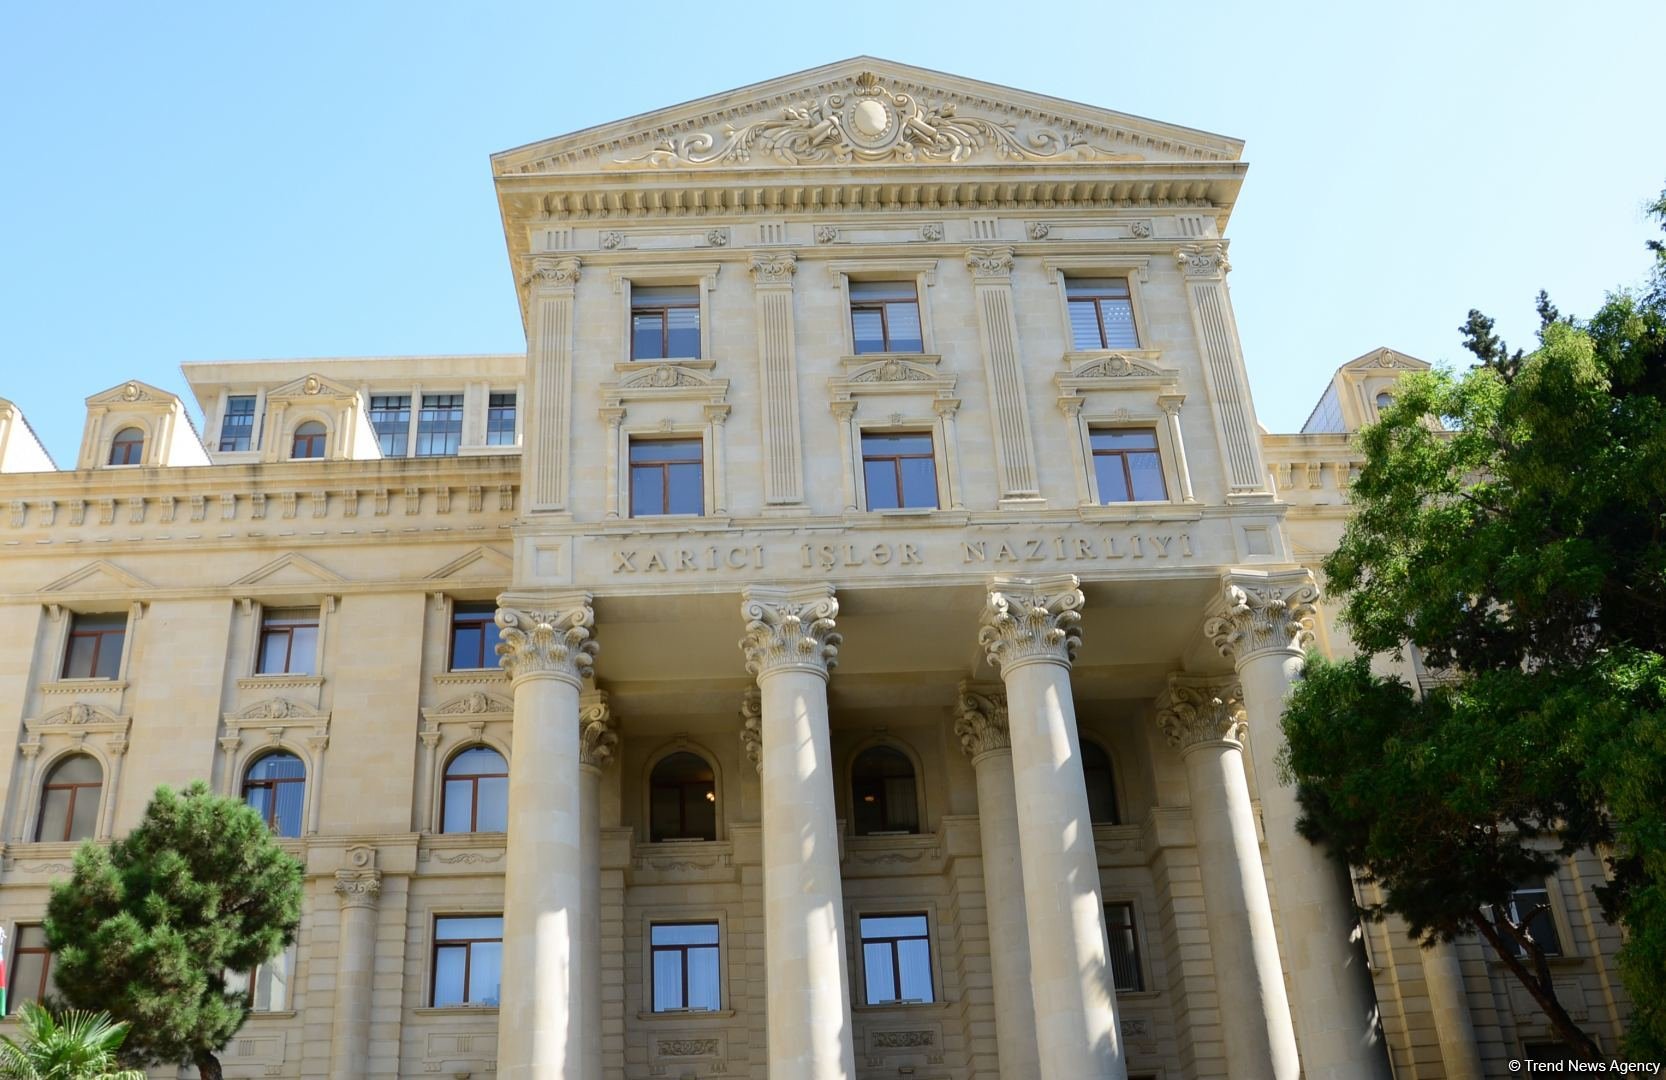 Attacks by Armenian nationals on buildings of Azerbaijani diplomatic missions cause serious concern - MFA